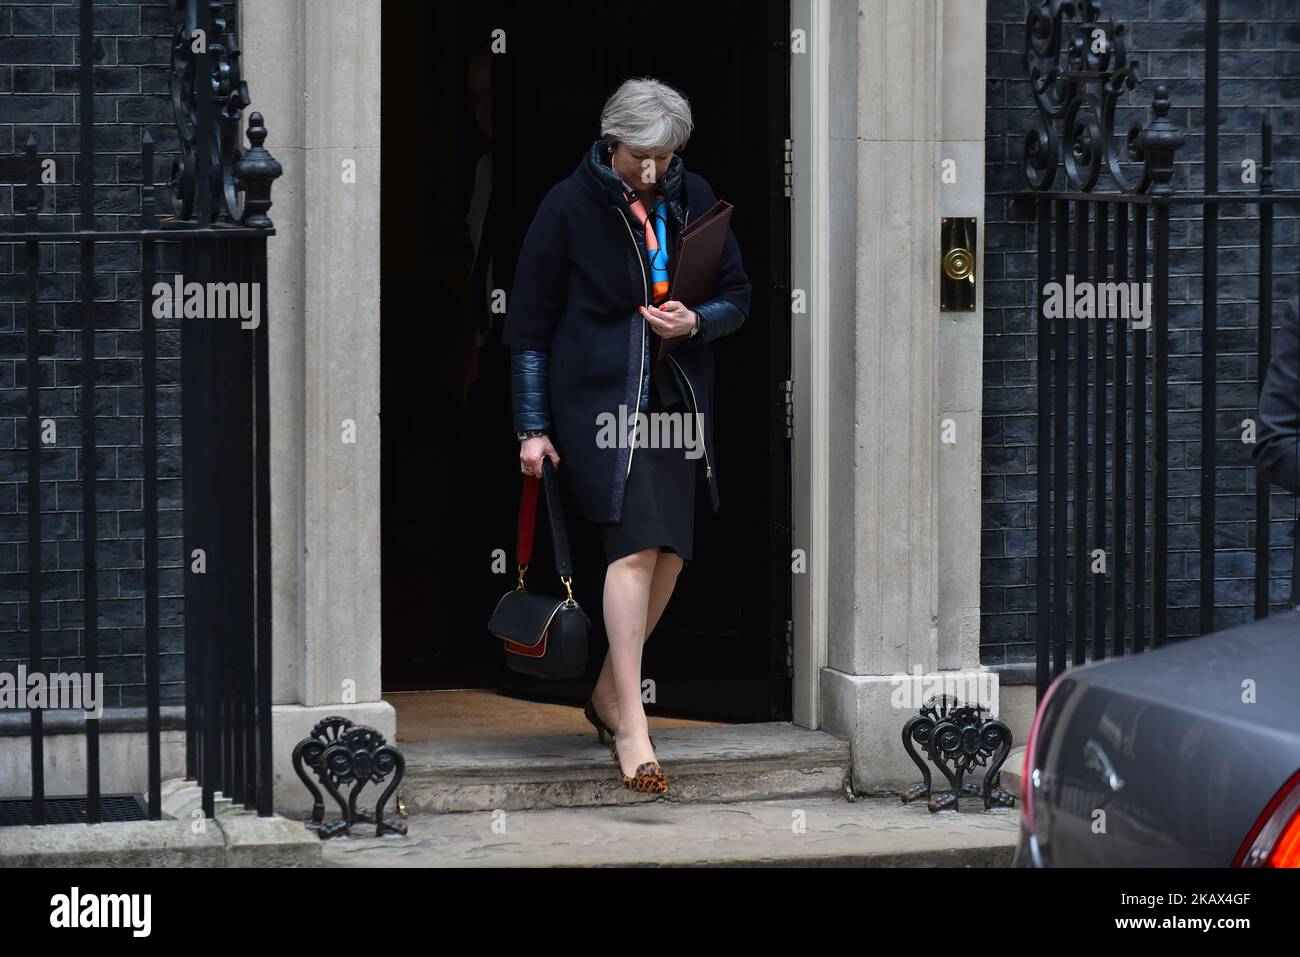 Prime Minister Theresa May leaves Downing Street after attending the weekly Cabinet meeting, London, UK on March 13, 2018. Prime Minister Theresa May and Chancellor of the Exchequer Philip Hammond headed to the Houses of Parliament as he gives Spring Budget update. (Photo by Alberto Pezzali/NurPhoto) Stock Photo